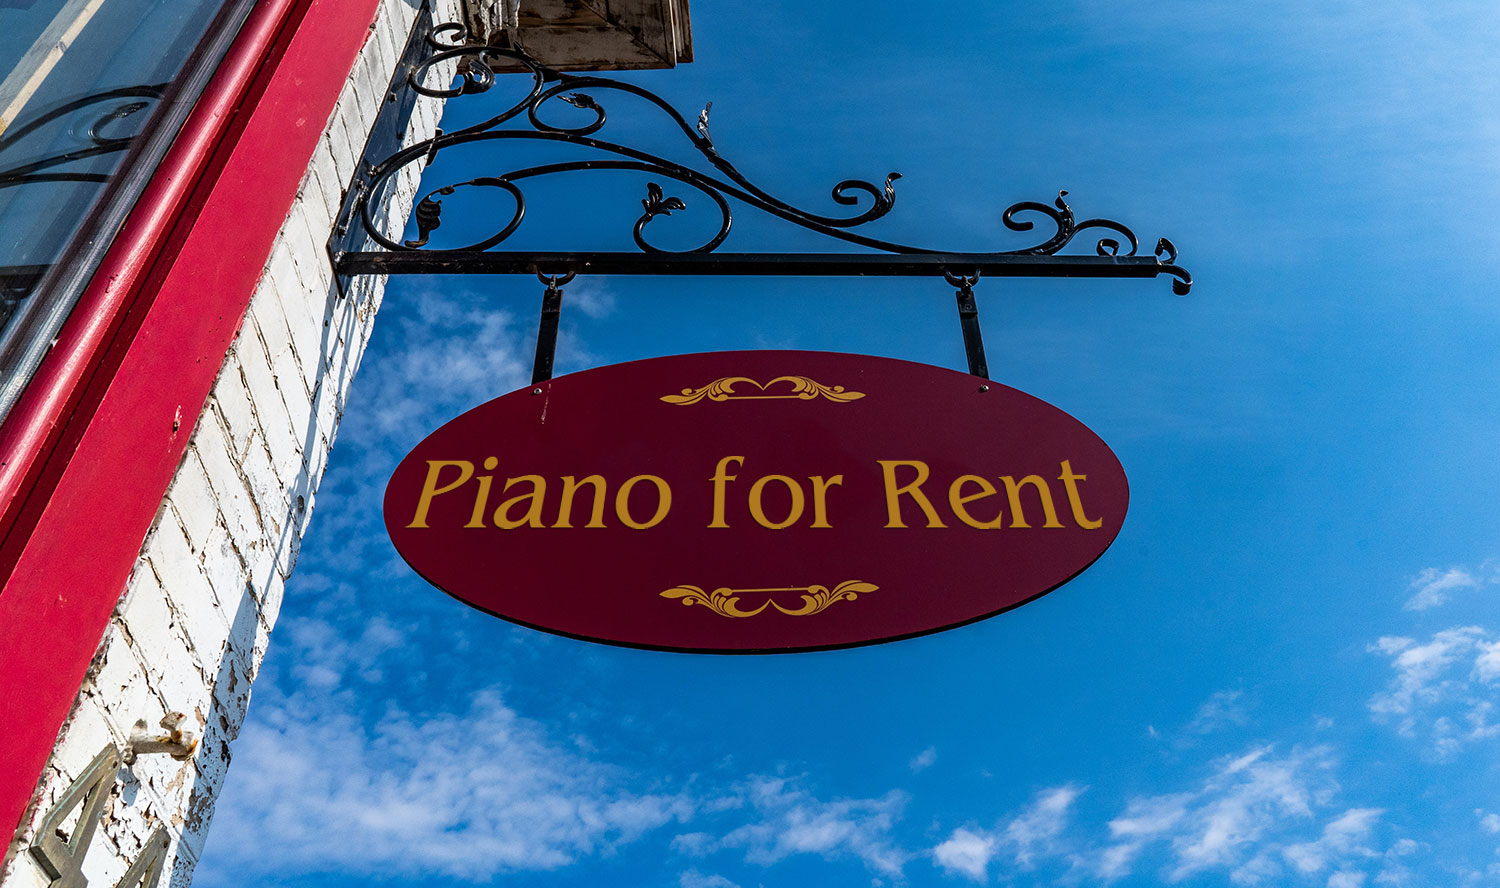 Where can I rent a piano?